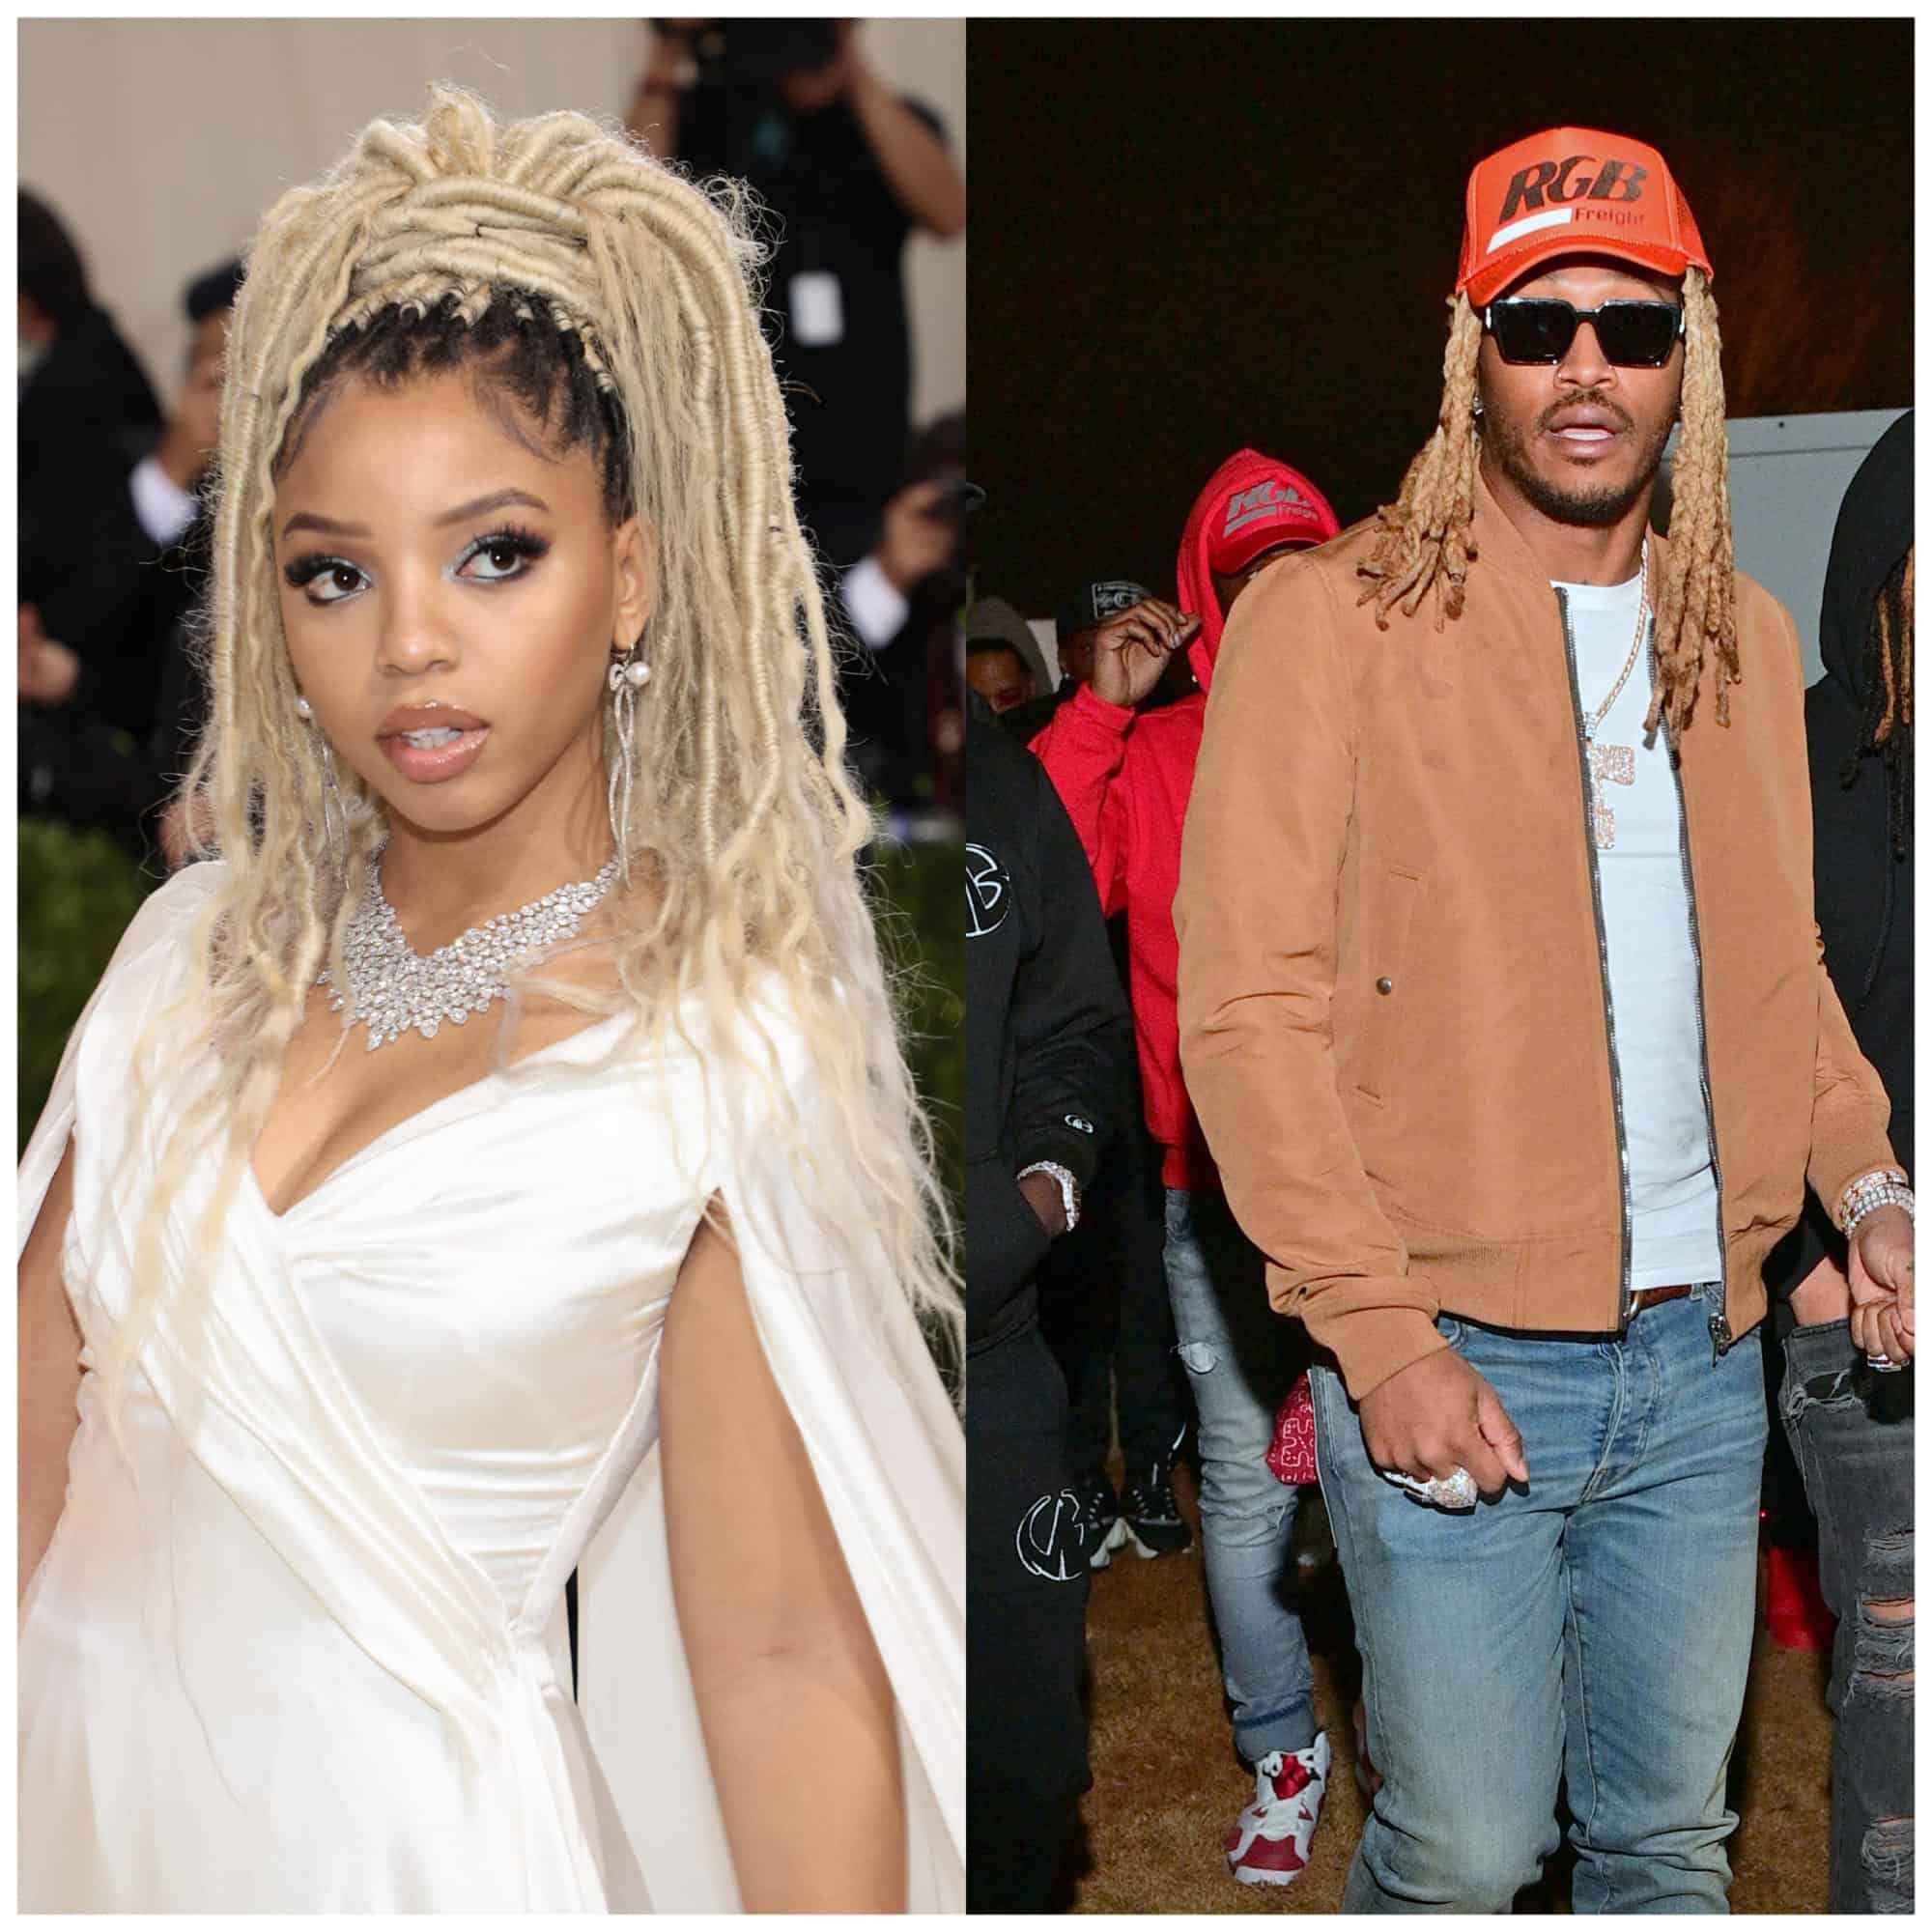 future is dating who now